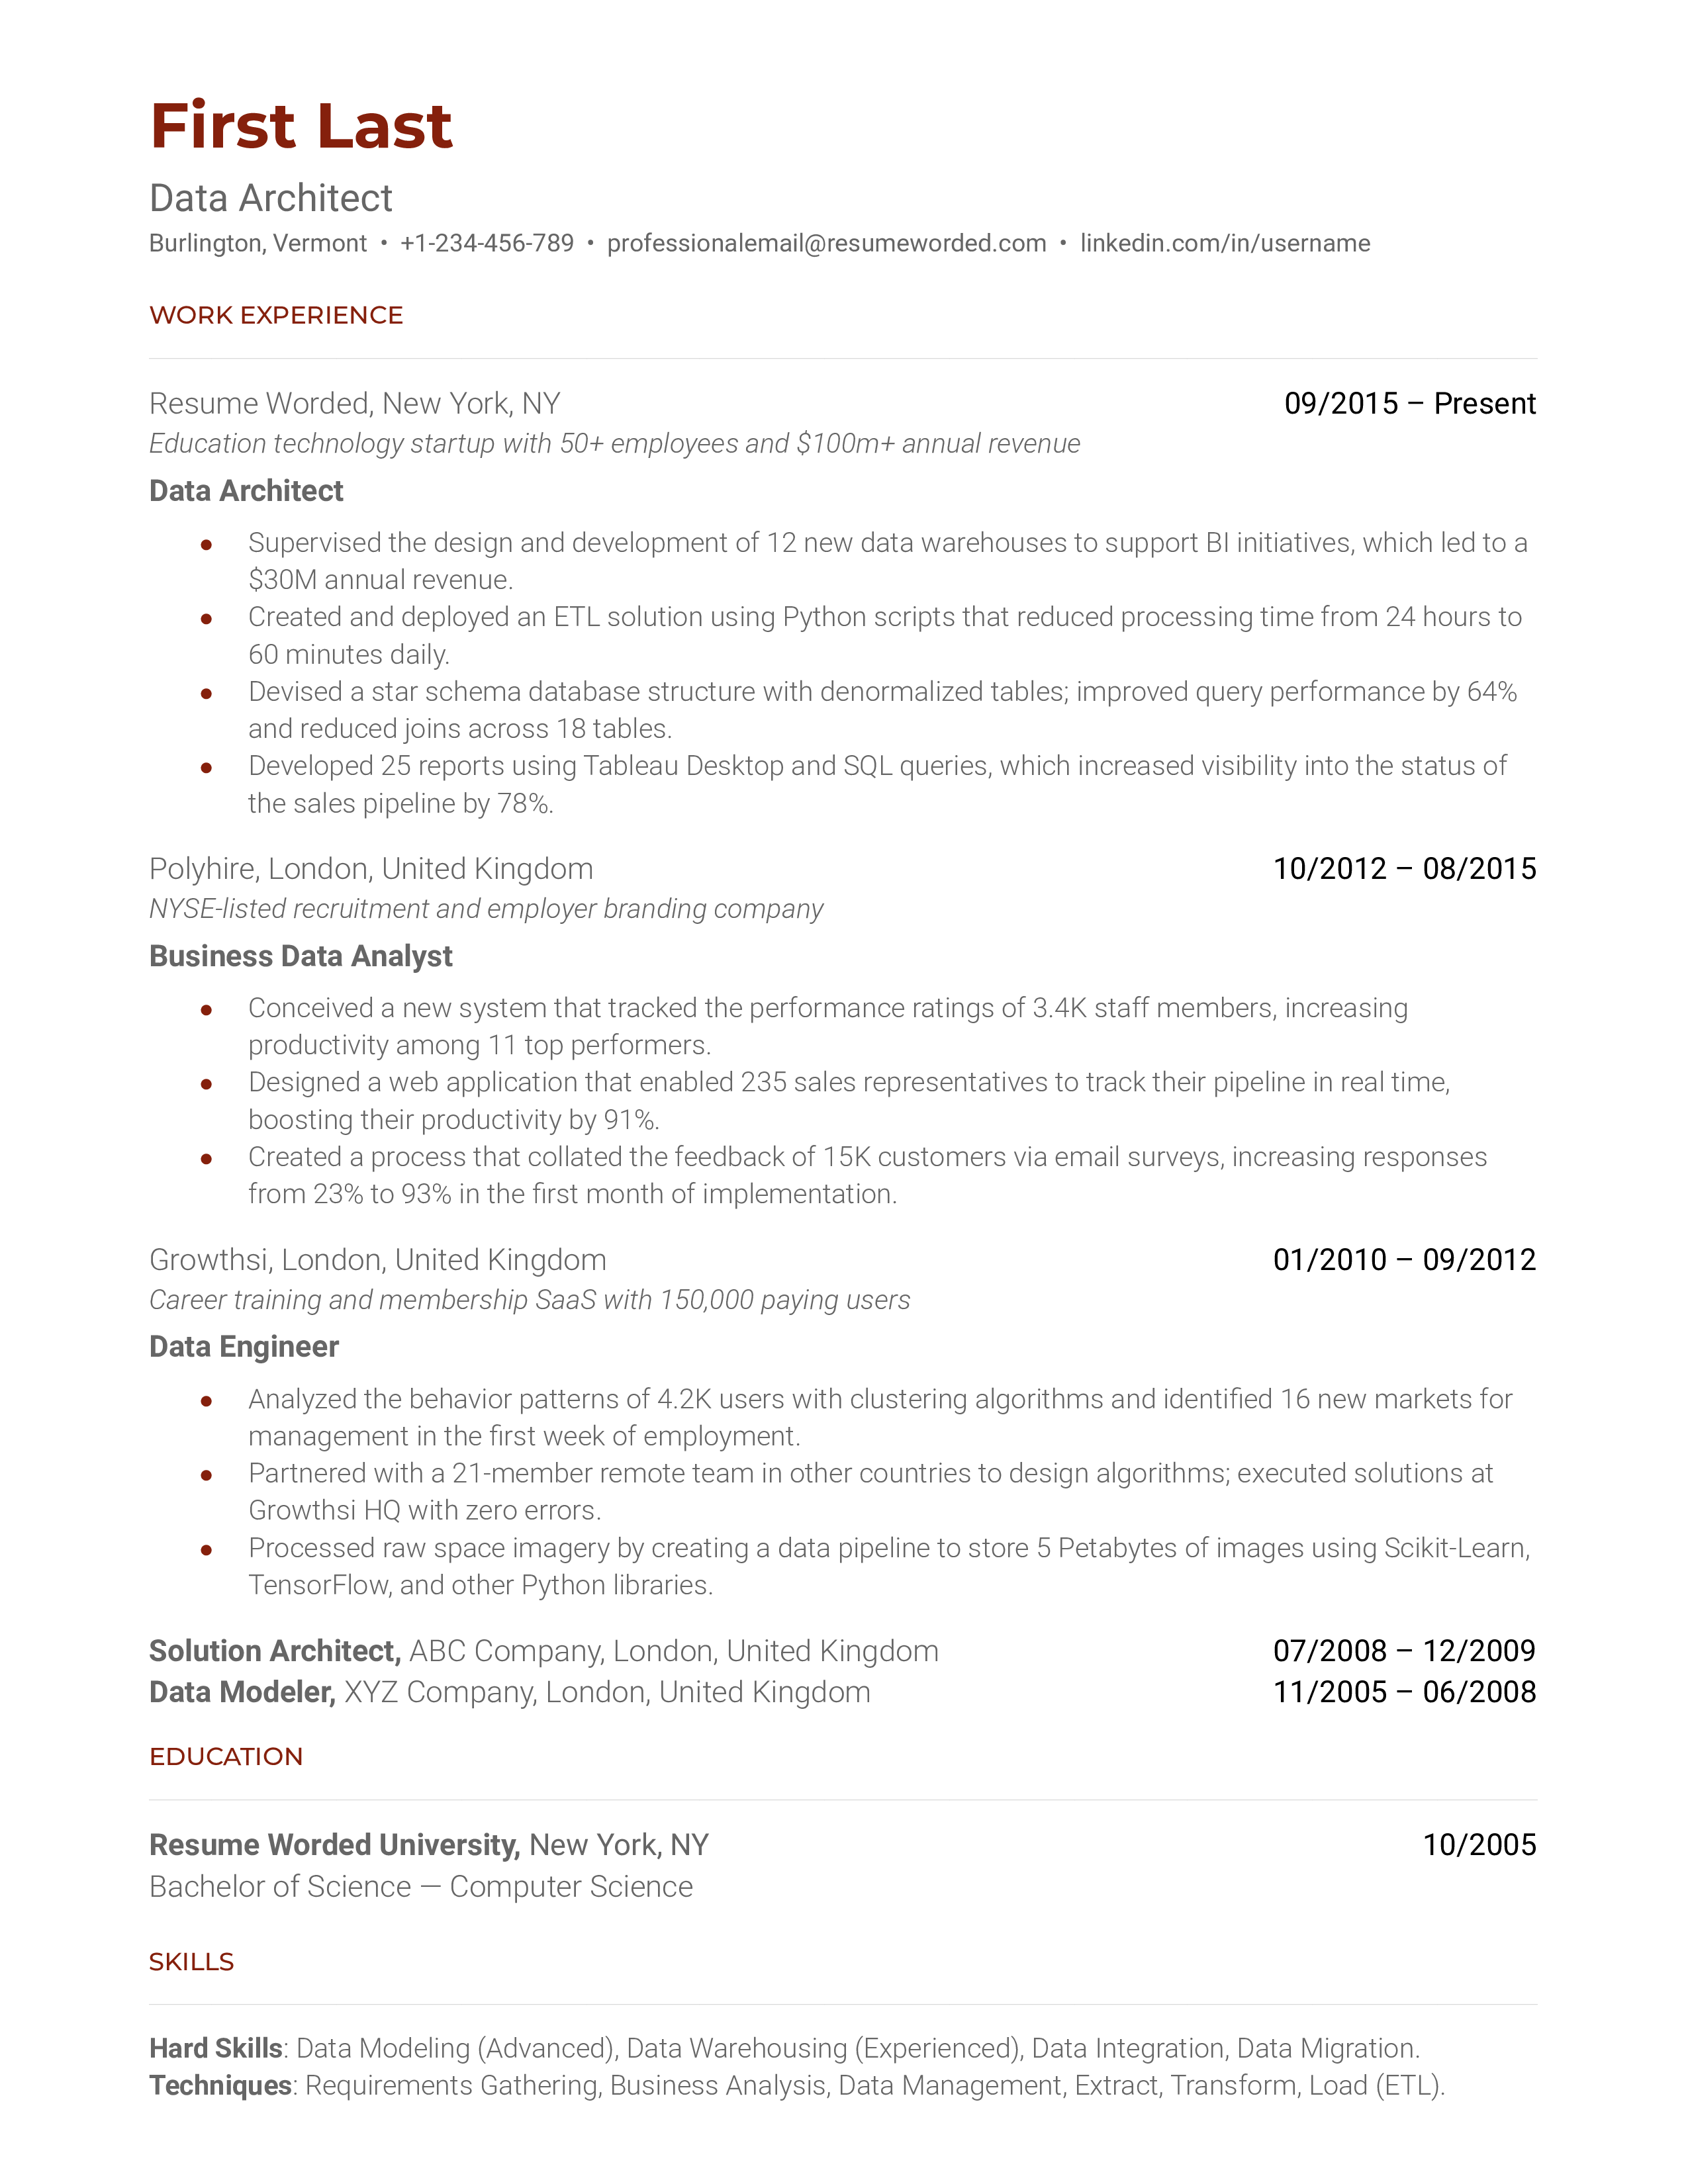 A data architect resume template that highlights relevant work experience